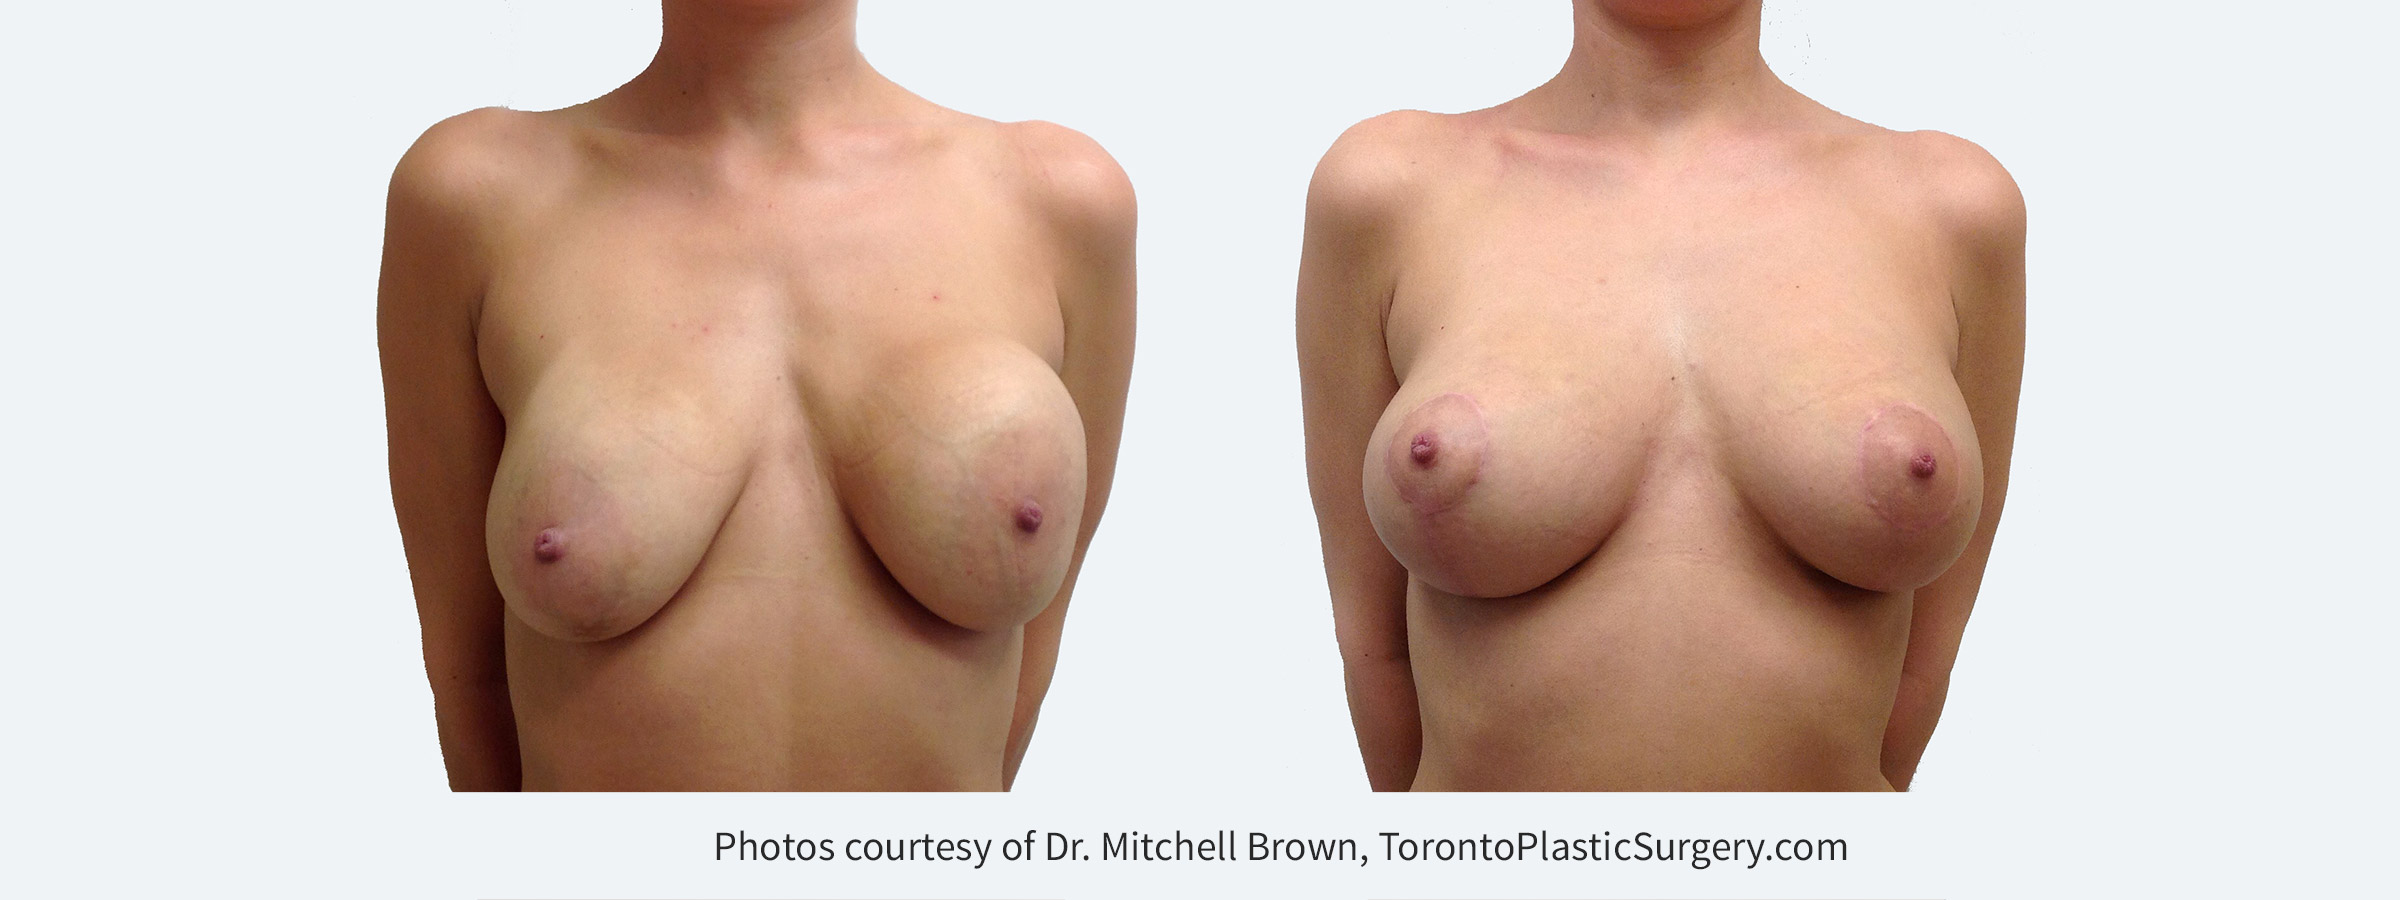 Recurrent capsular contracture on the left and implant rupture on the right treated with implant removal, scar tissue removal, replacement of new silicone gel implants under the pectoral muscle and breast lift. Before and 3 months after